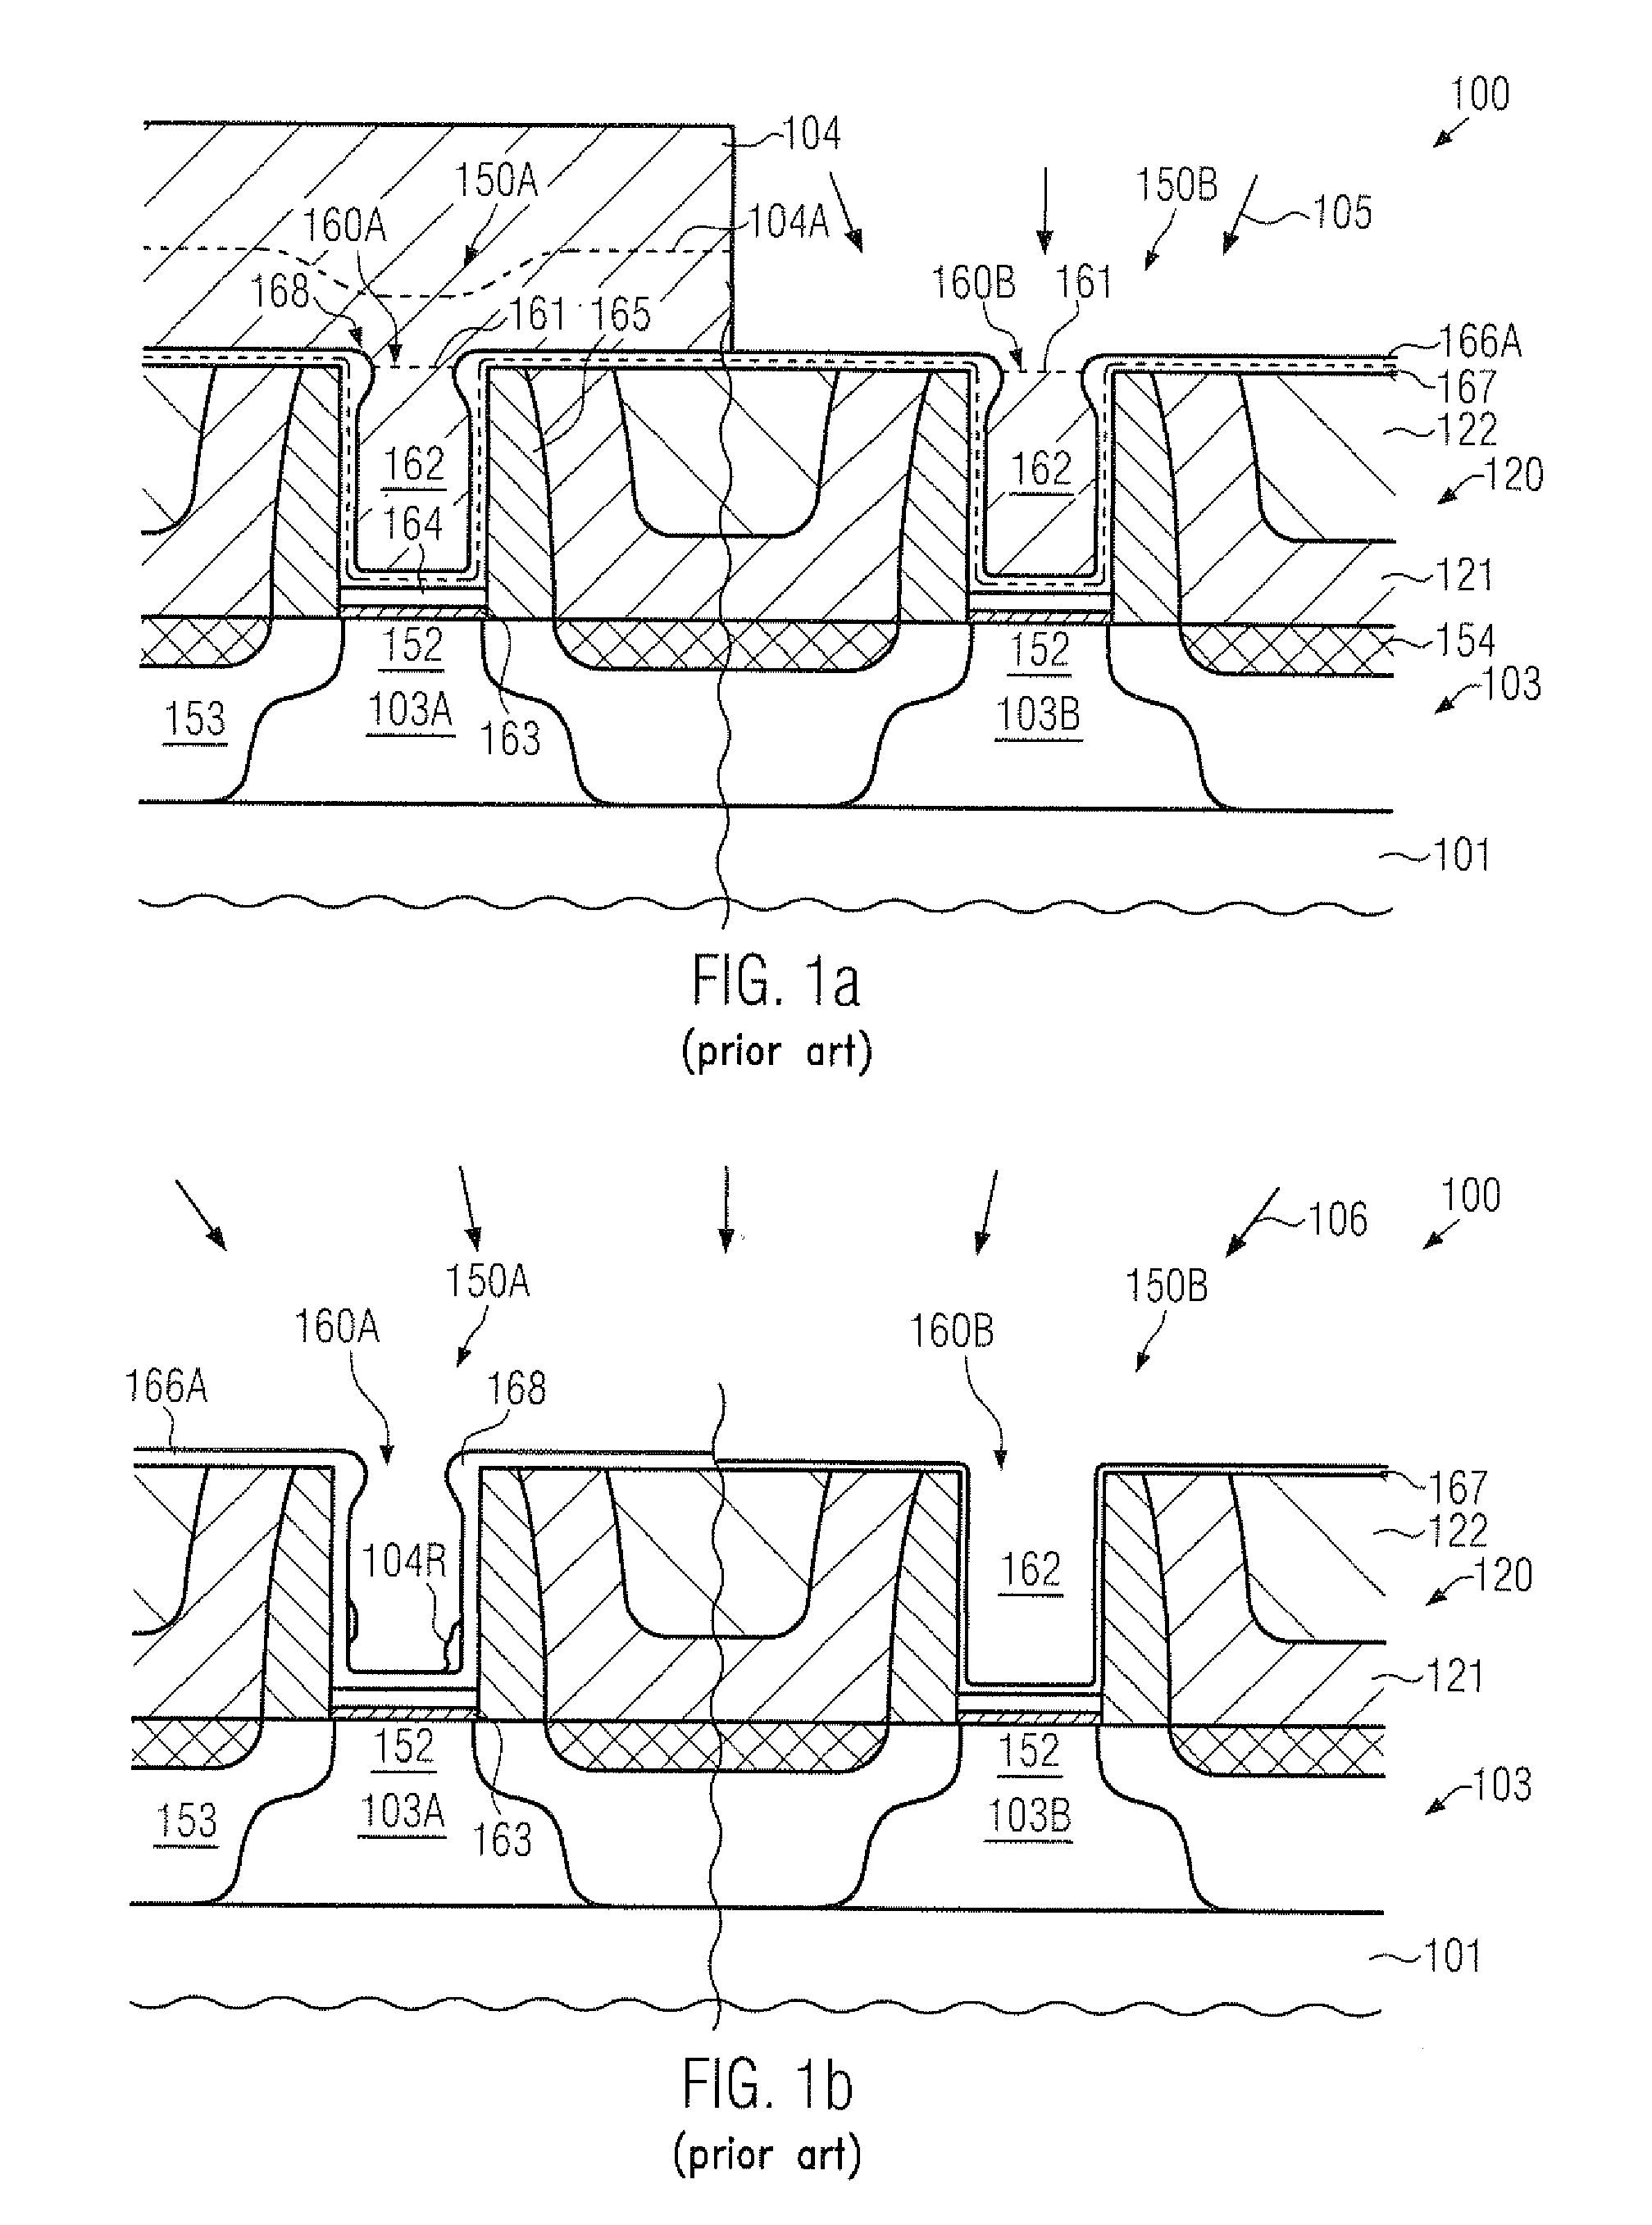 High-k metal gate electrode structures formed by separate removal of placeholder materials using a masking regime prior to gate patterning